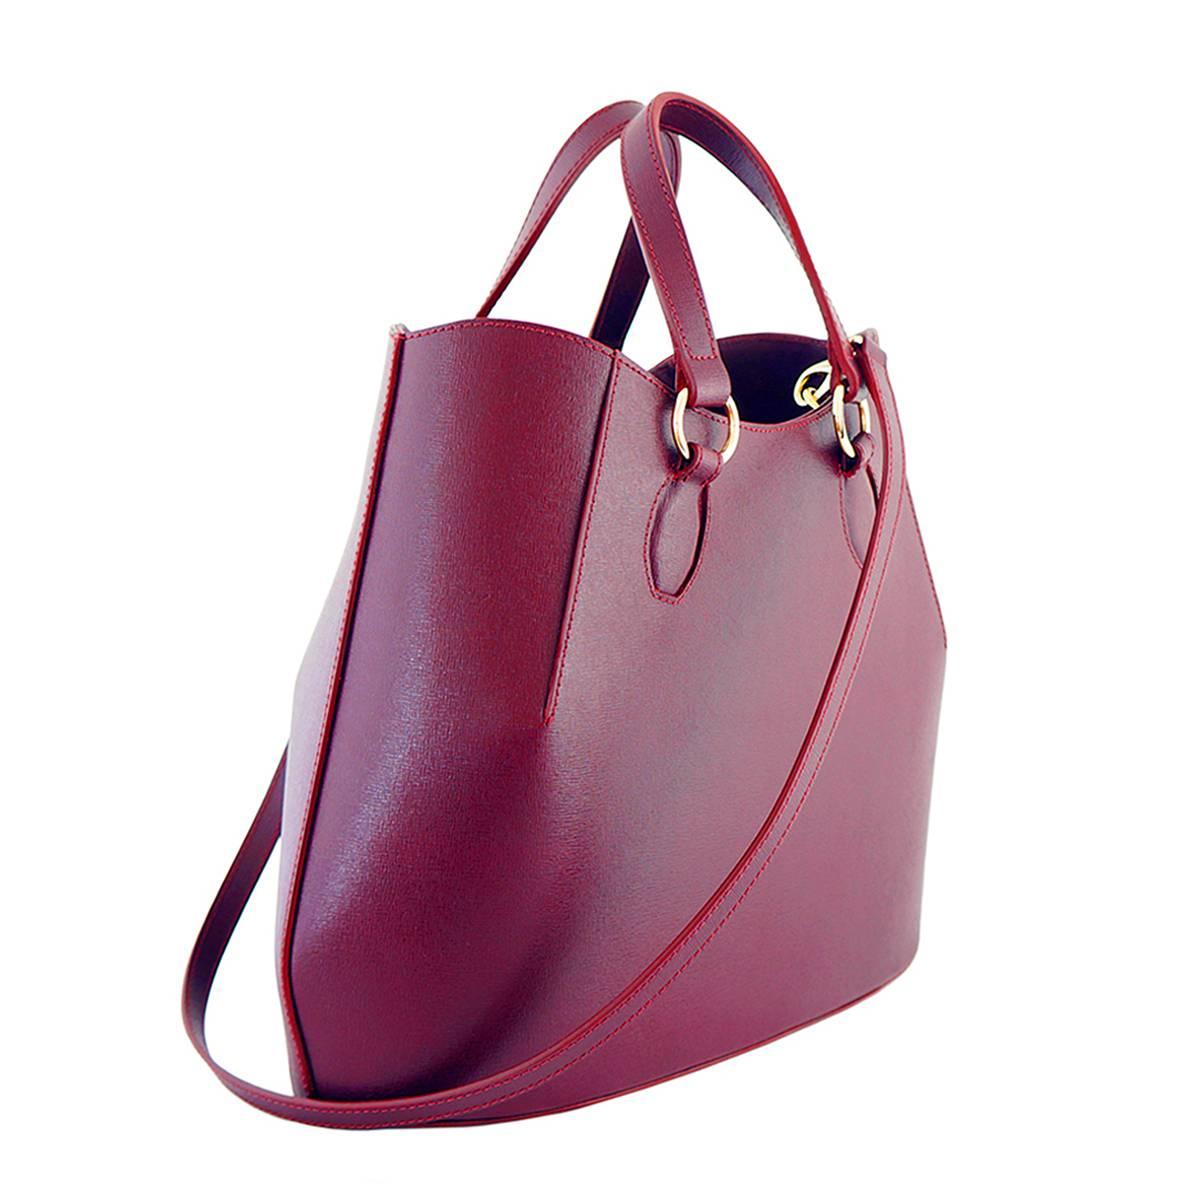 Burgundy saffiano finish calf leather with black pigskin lining

Brass hardware

Detachable long shoulder strap

Internal phone holders, open pocket and two zip pockets